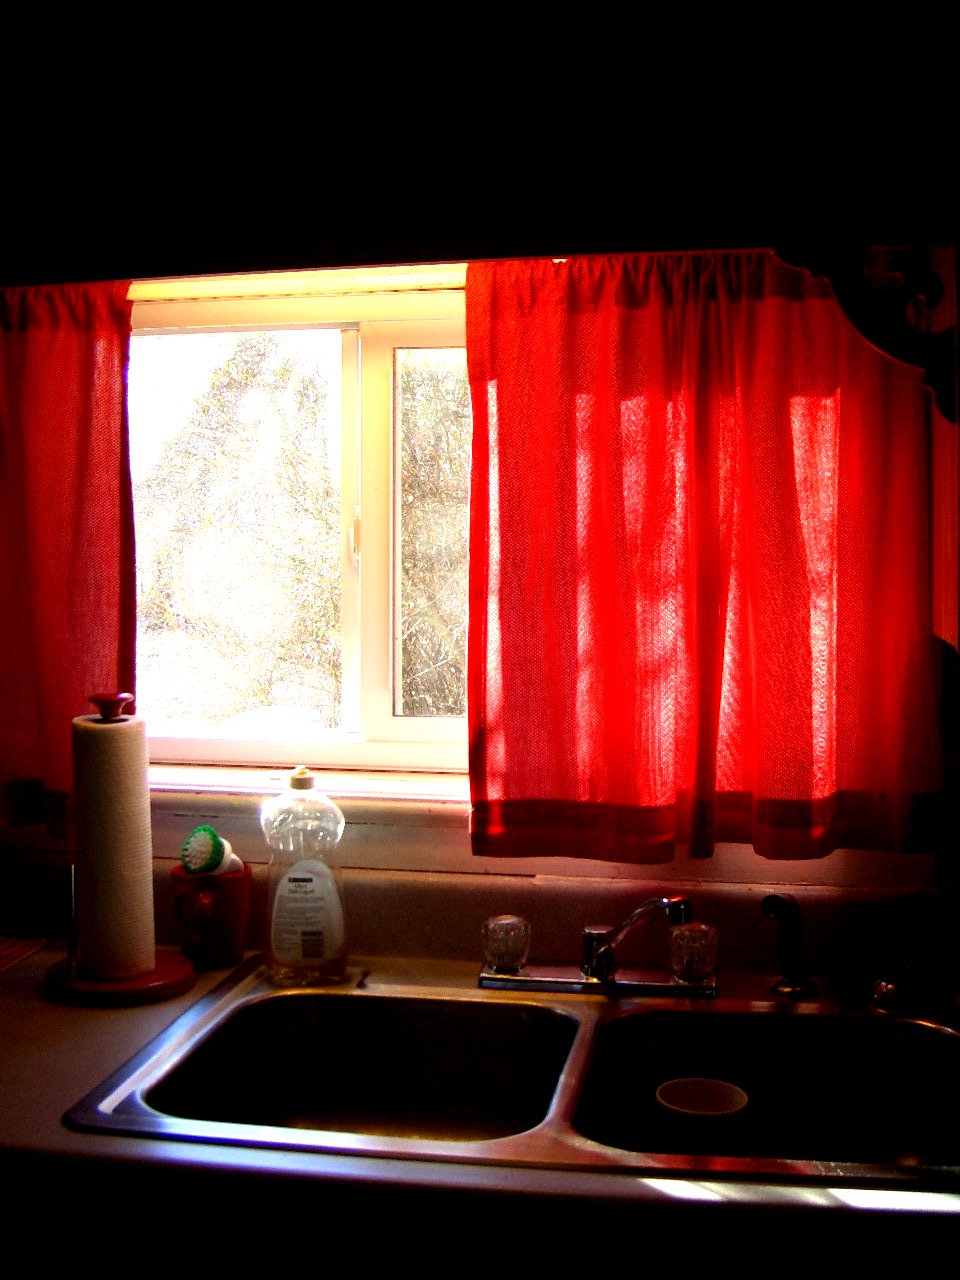 [the+red+curtains.jpg]